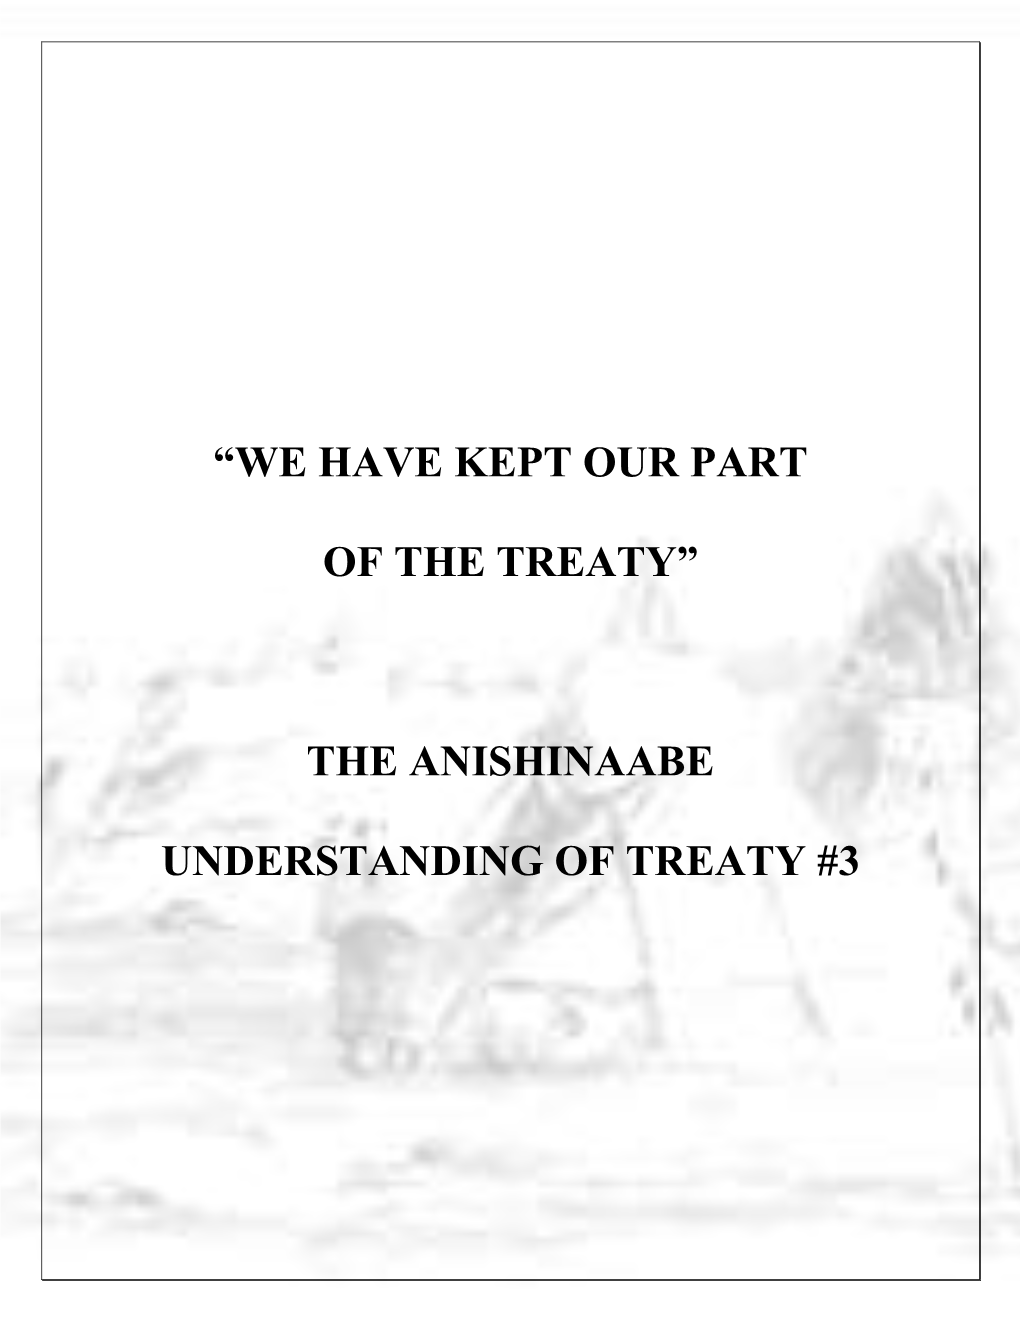 “We Have Kept Our Part of the Treaty” the Anishinaabe